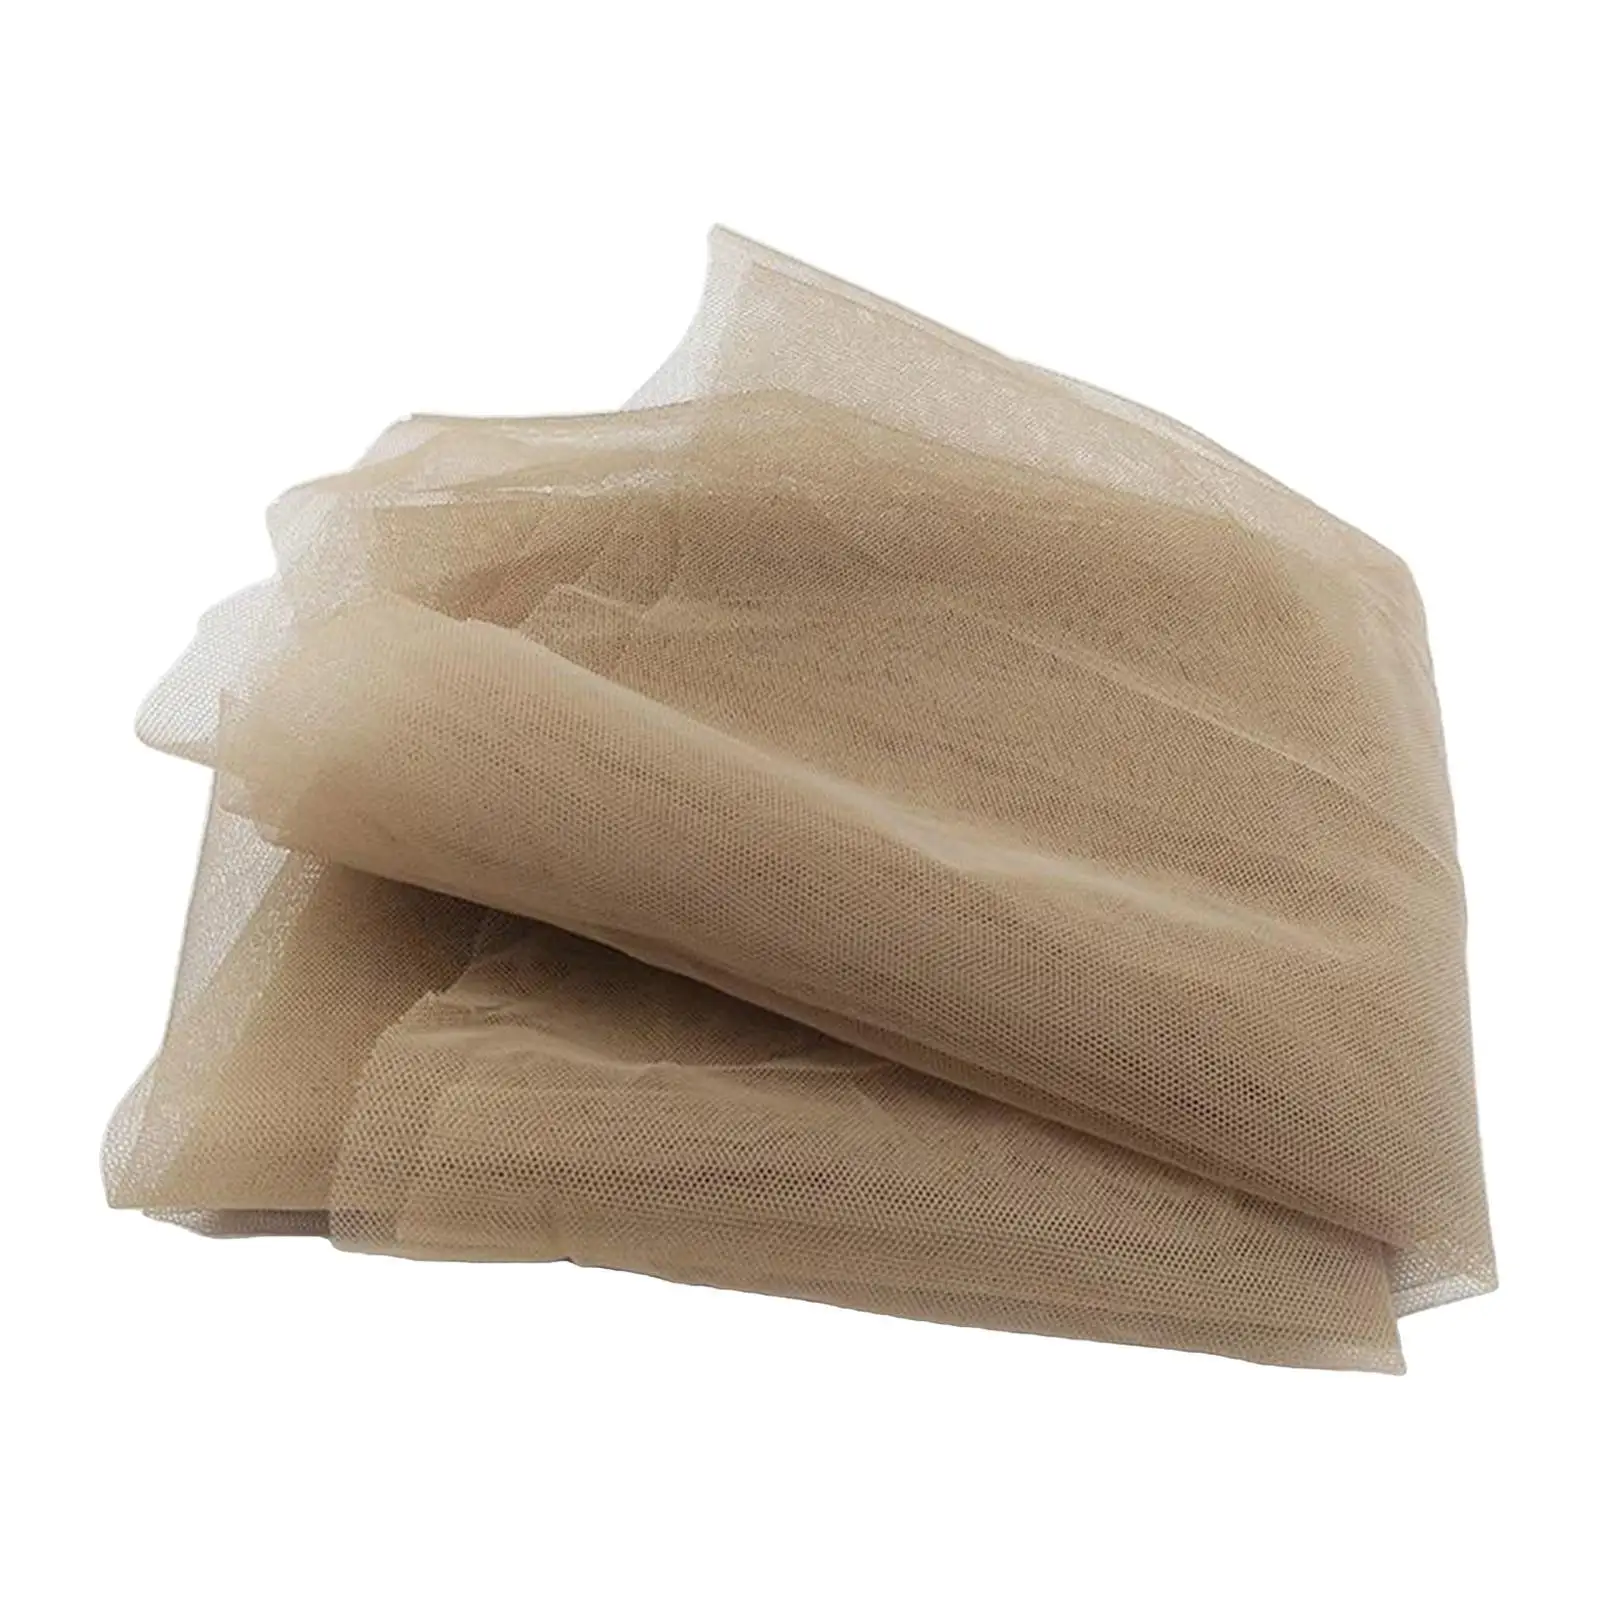 1 Yard Material for Wigs Making Wig Caps Closures and Frontals Foundation Wig Accessories,Light Brown